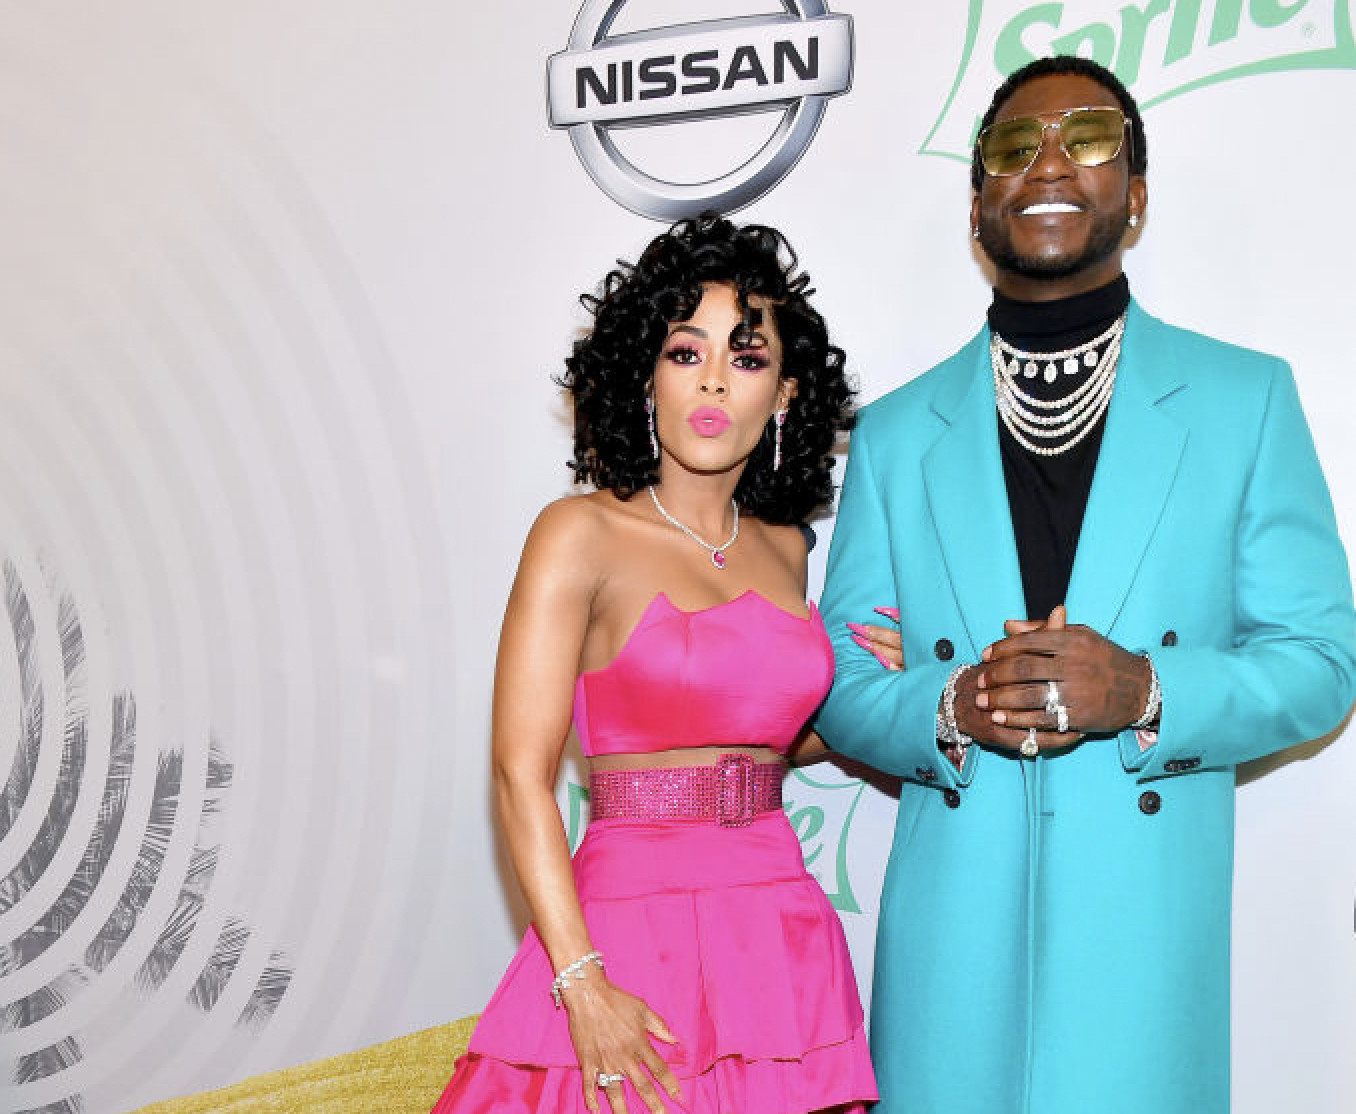 Details on Gucci Mane's Kids — His Wife Is Expecting